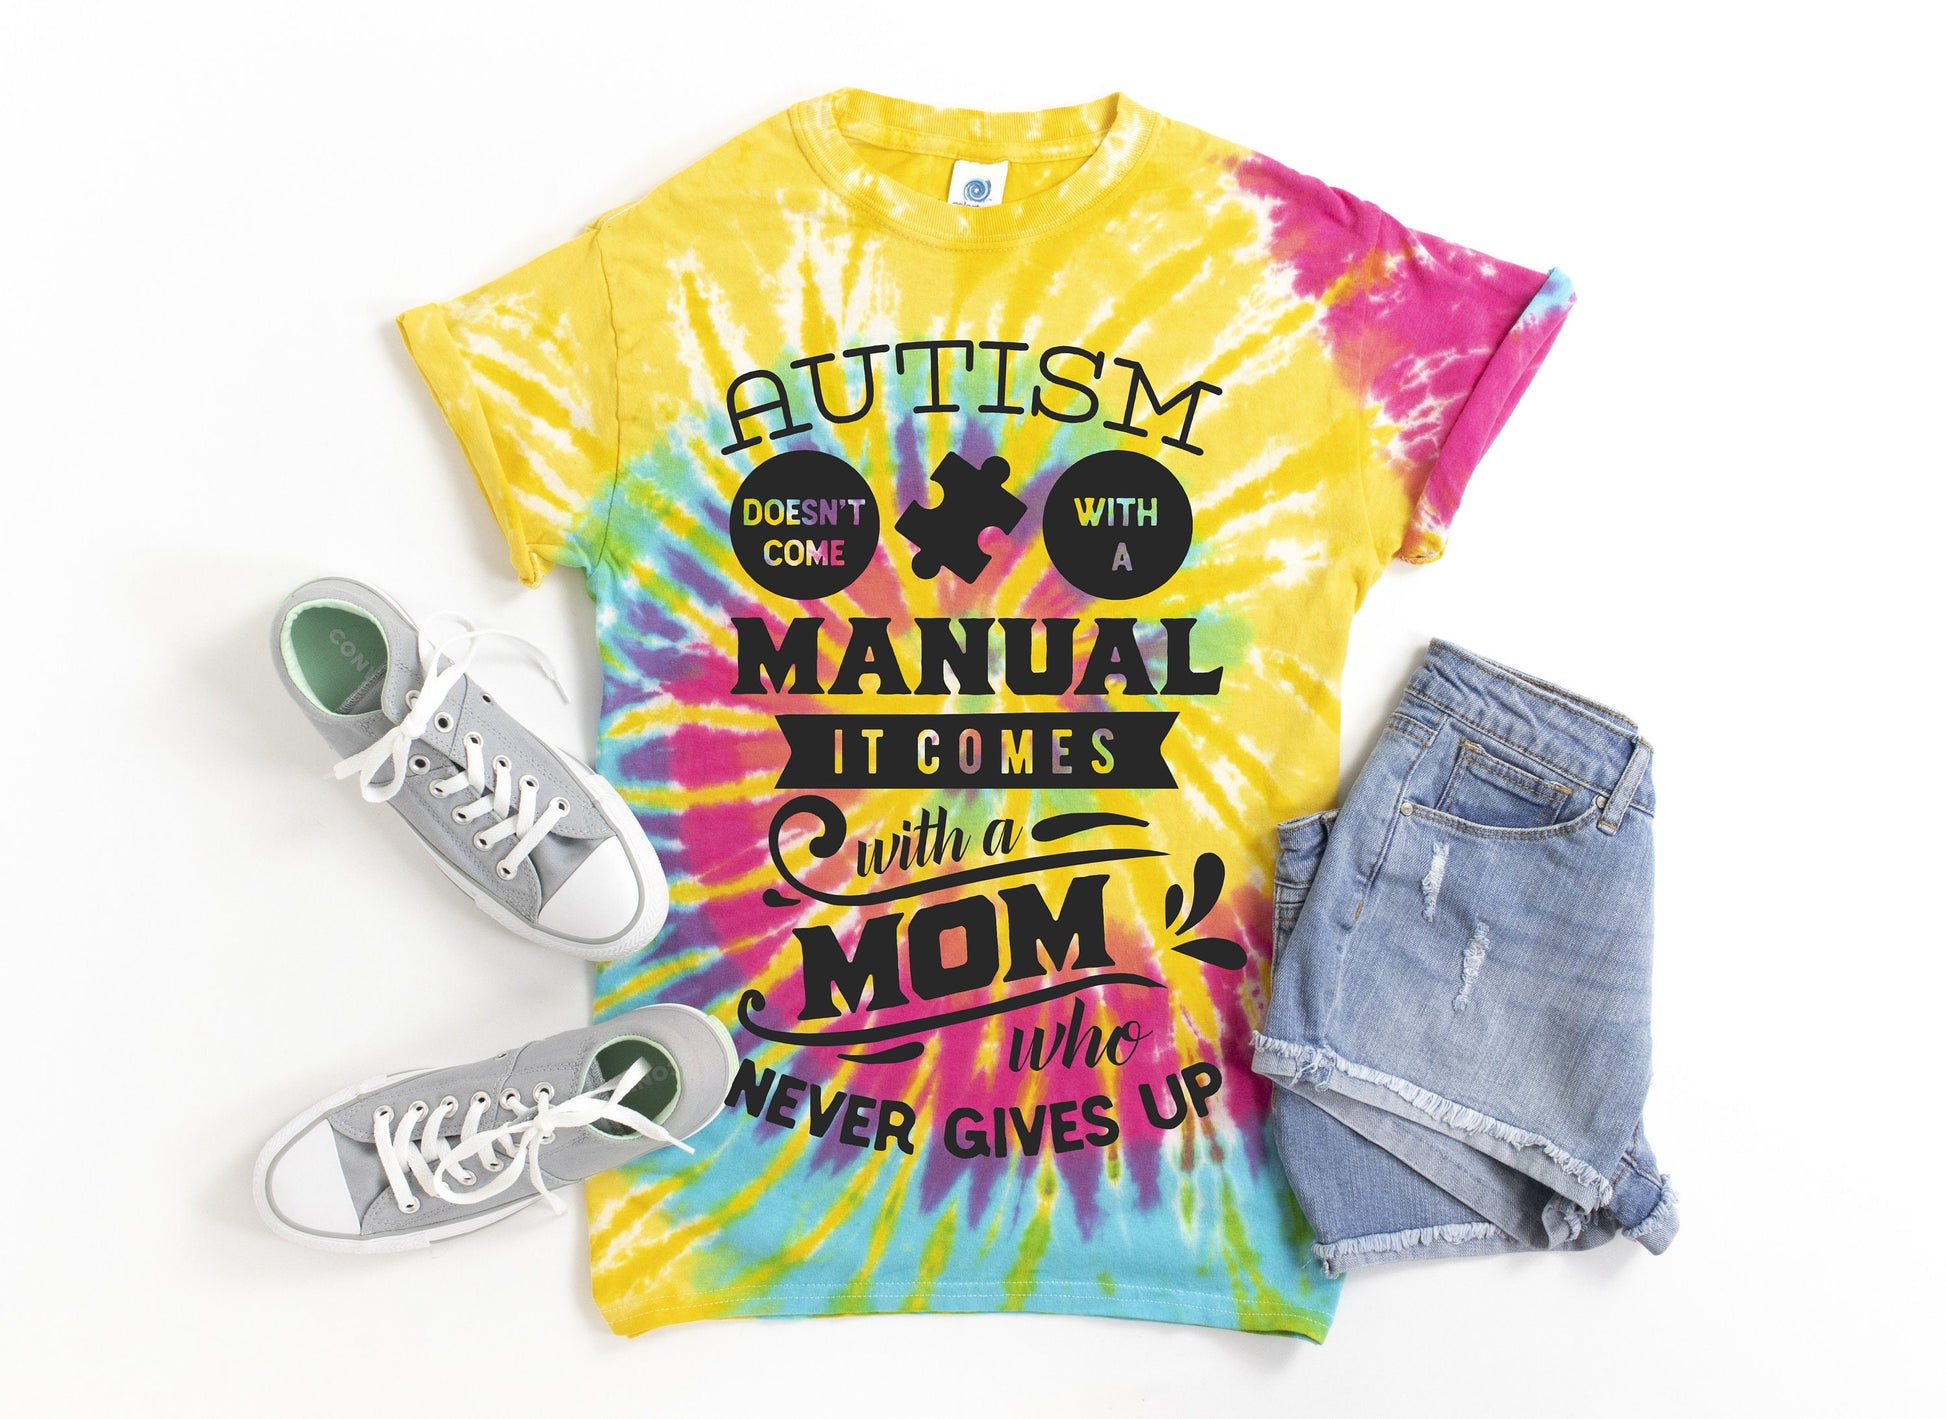 Autism Doesn't Come with a Manual Mom Tie Dye t-shirt - Kids and Adults Sizes - Autism Mom Shirt - Autism Awareness - Autism Kids Shirt